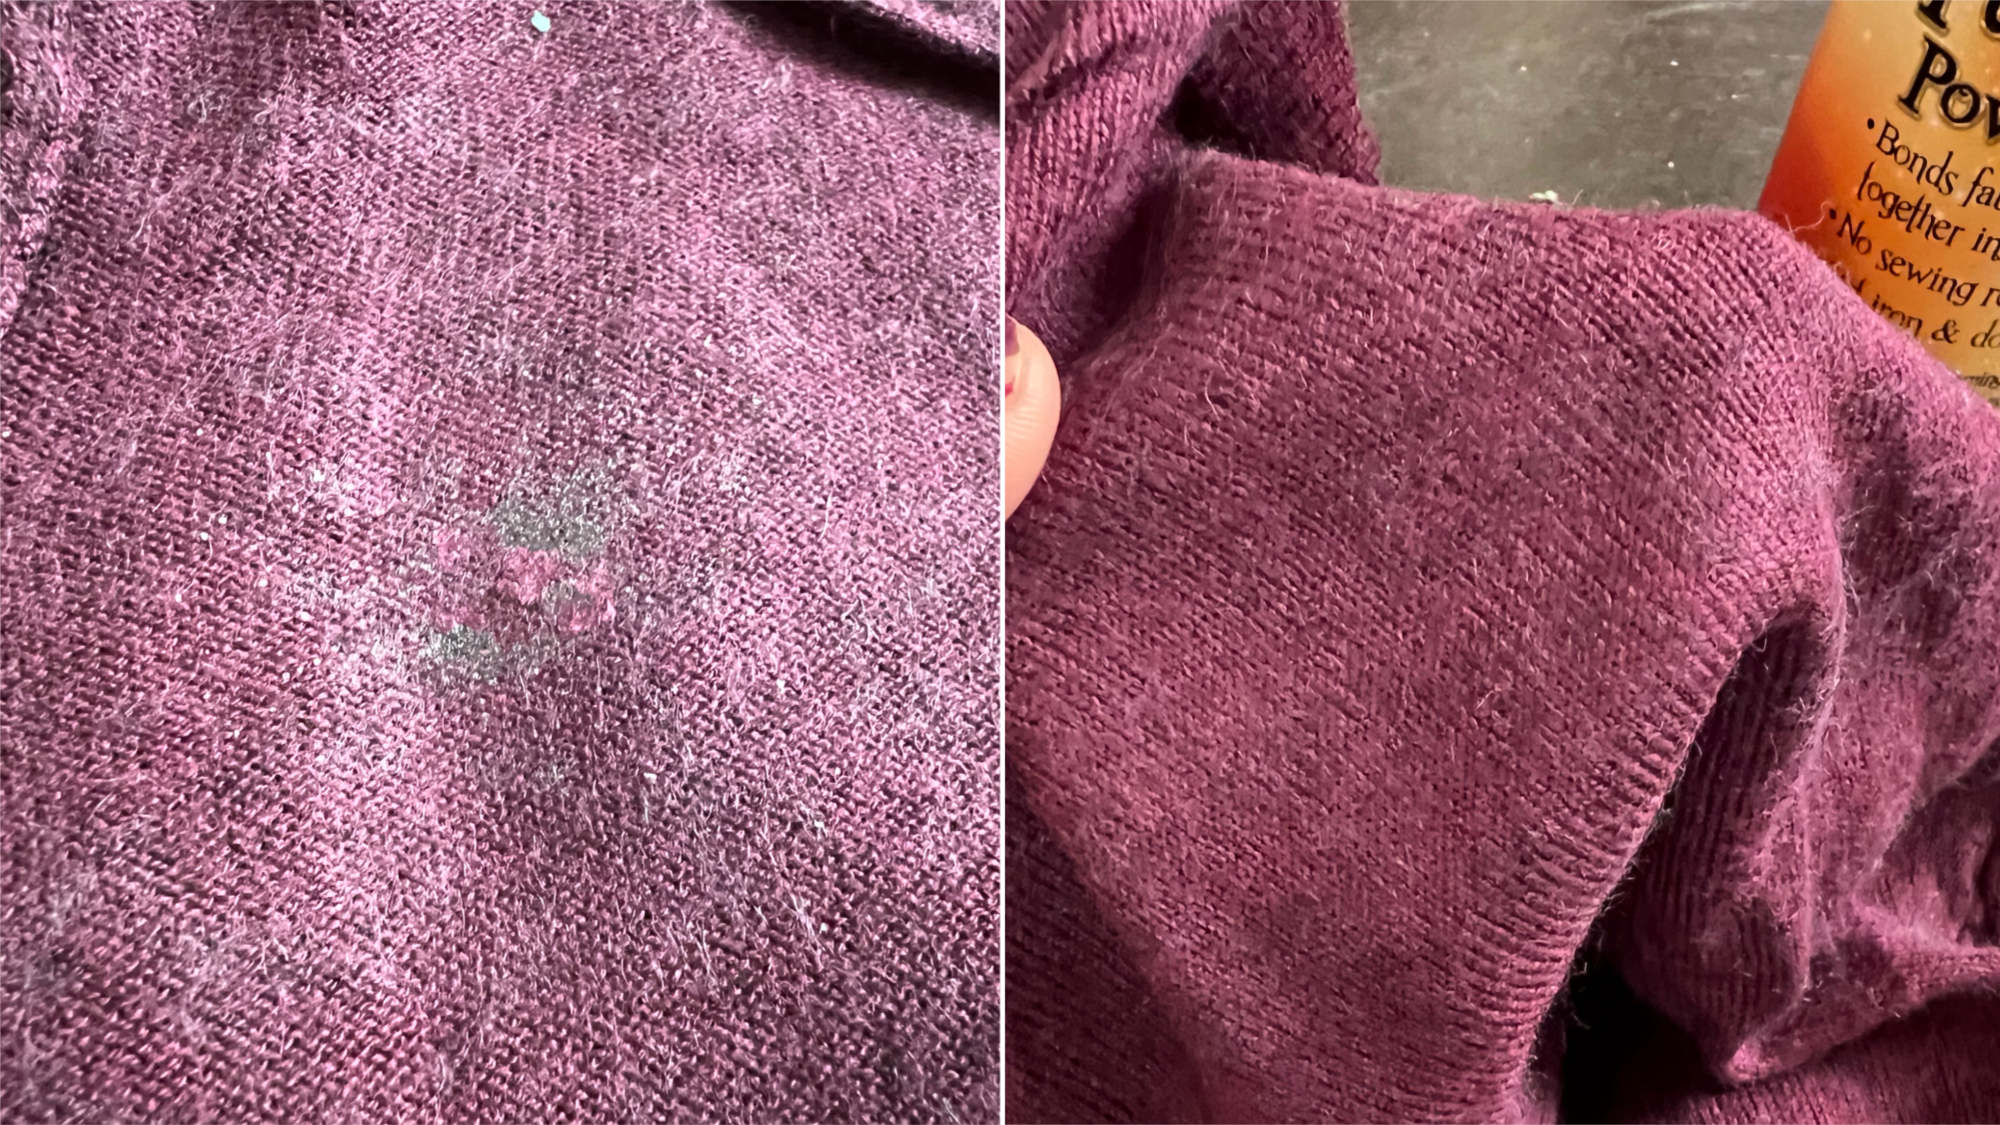 Inside of sweater after hole has been fixed and the outside view